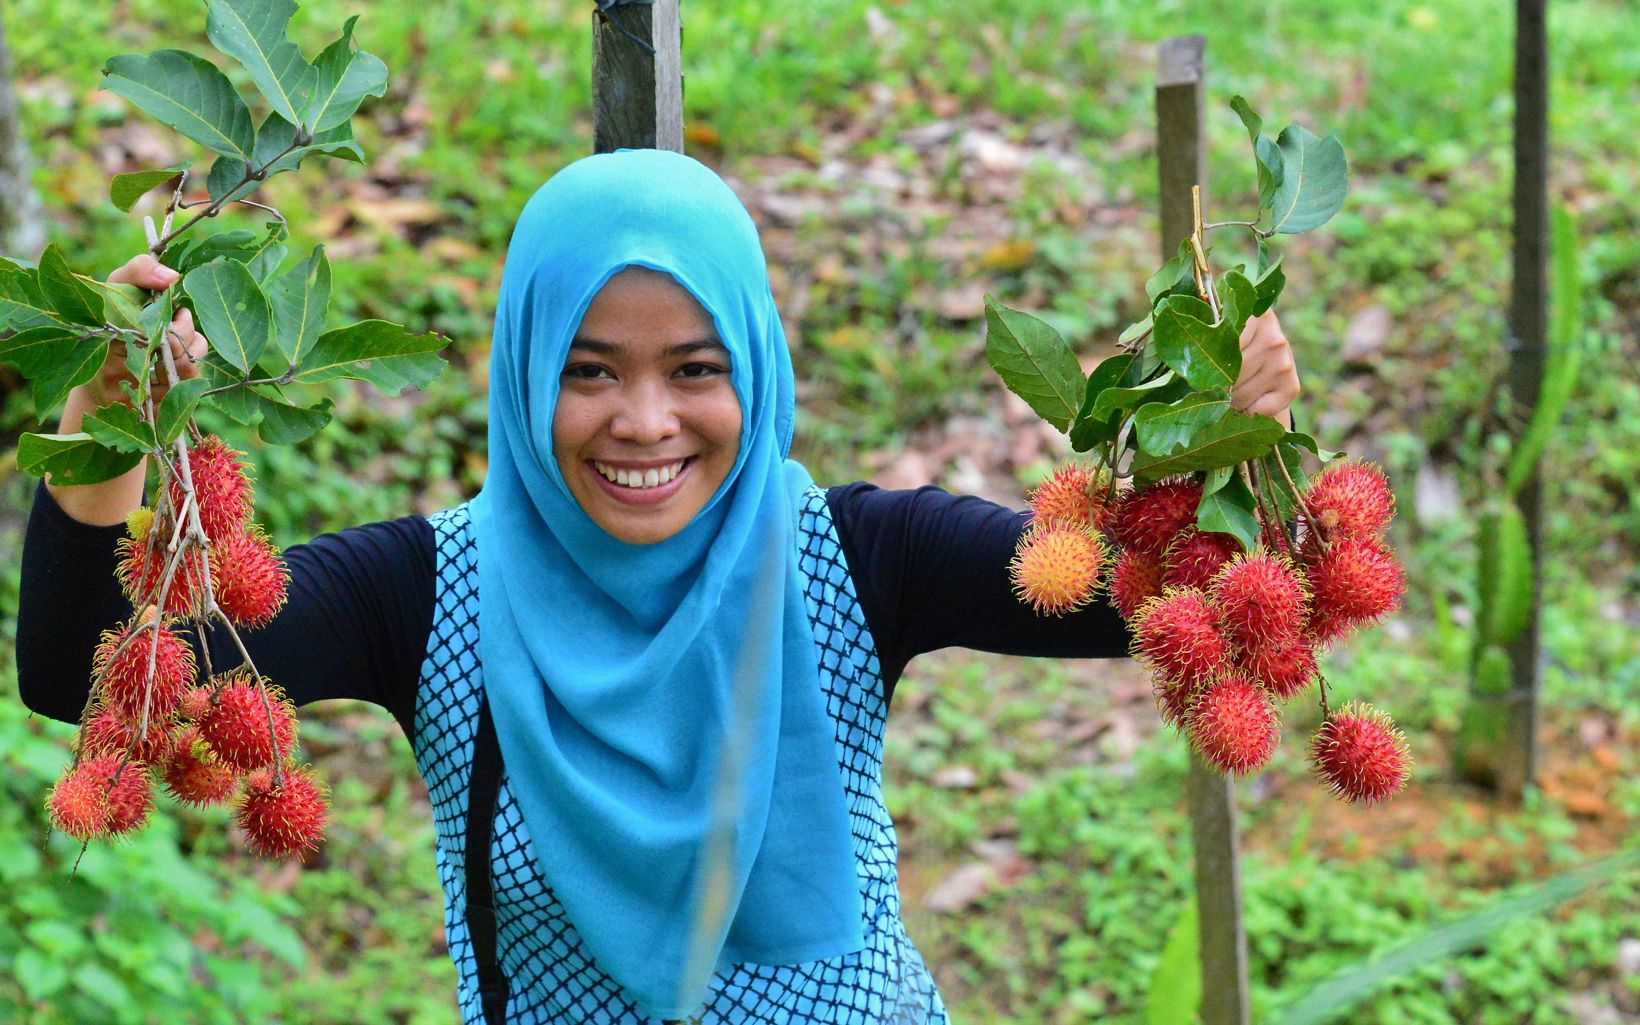 Local villagers can sell rambutan – an example of how healthy forests can help provide revenue for local communities.